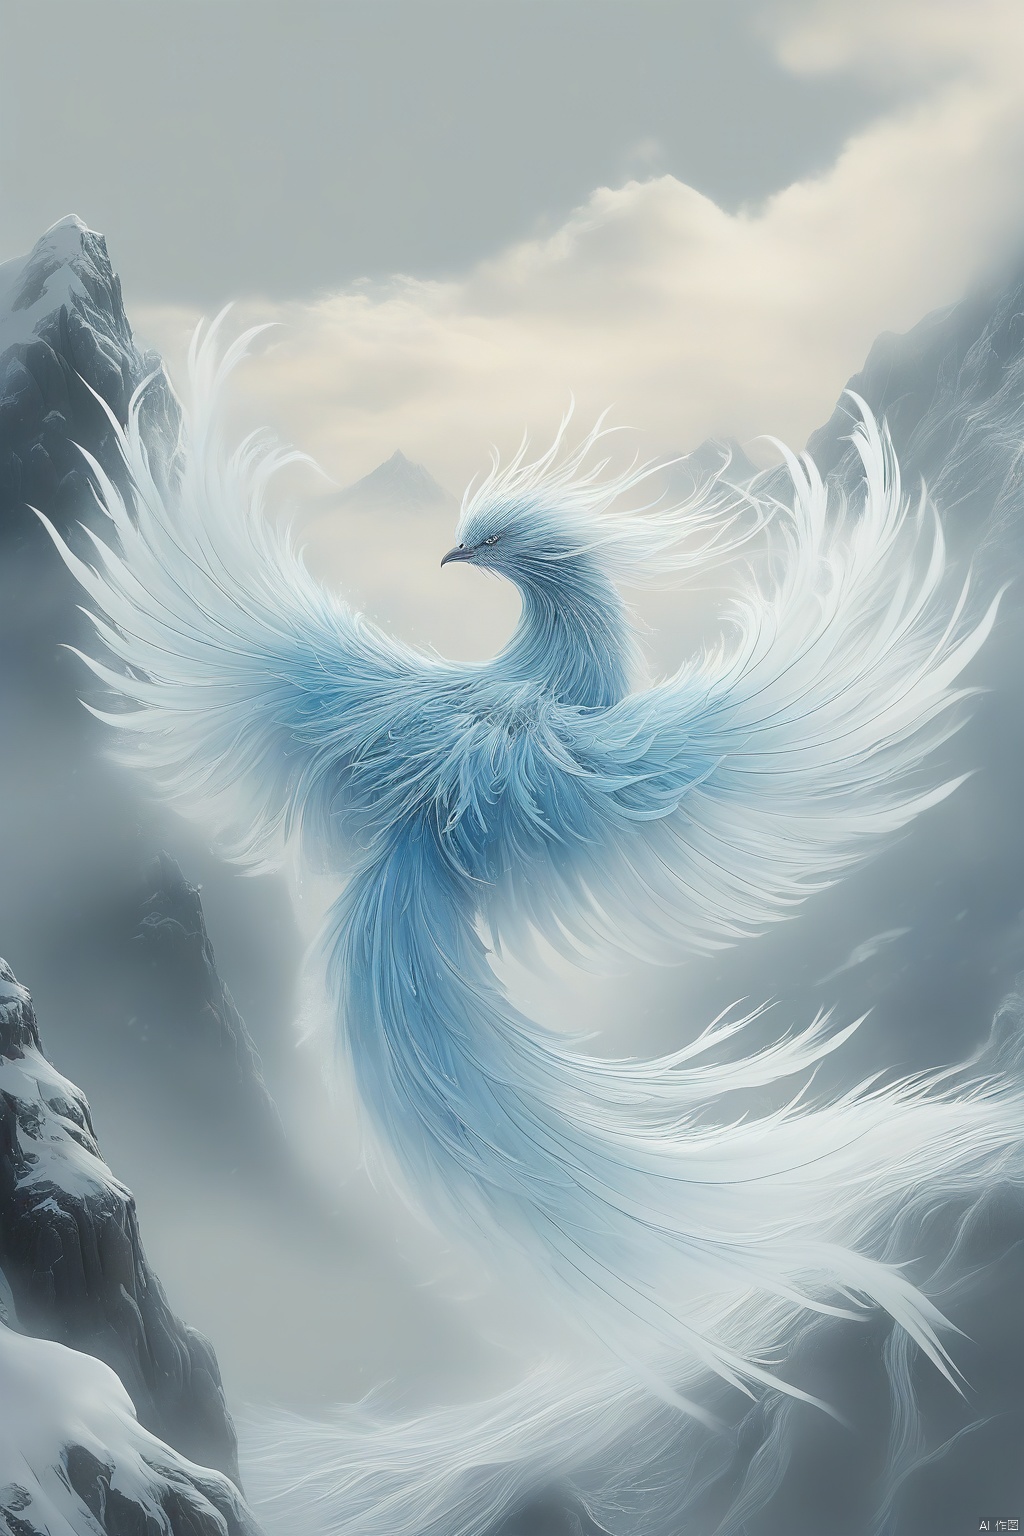 A light blue phoenix formed by ice water, with slender tail feathers fluttering in the wind. Mist covers part of the phoenix's body, and the background is a snowy mountain